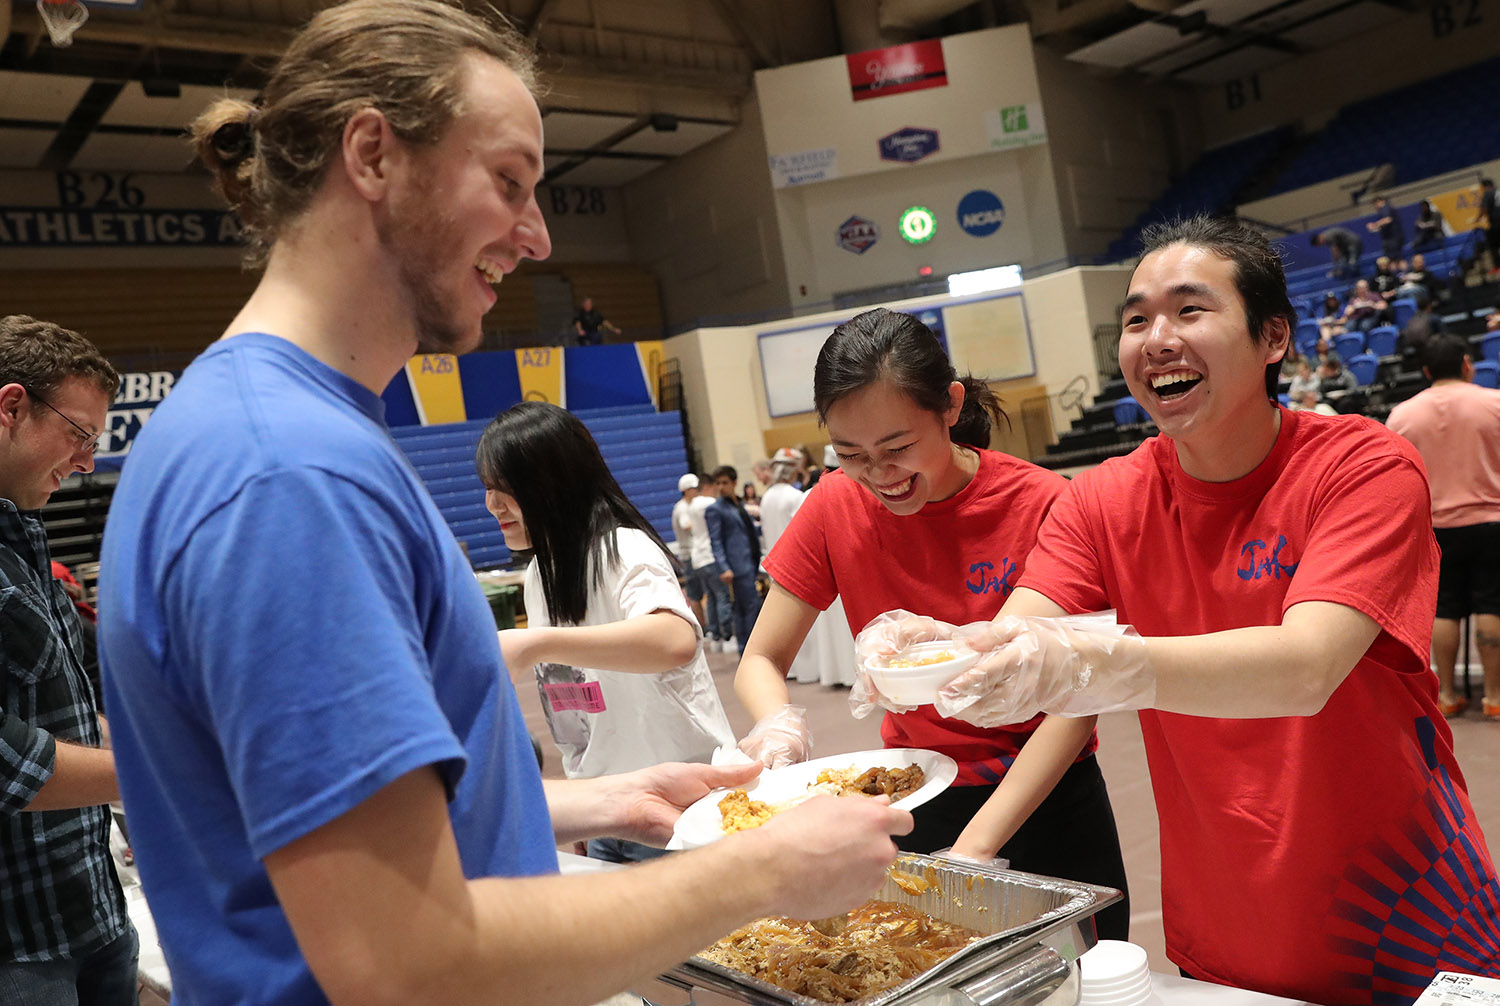 The Scott D. Morris International Food and Cultural Festival features food and drink from 11 different countries, along with traditional and modern performances and country-specific booths with games and educational activities.